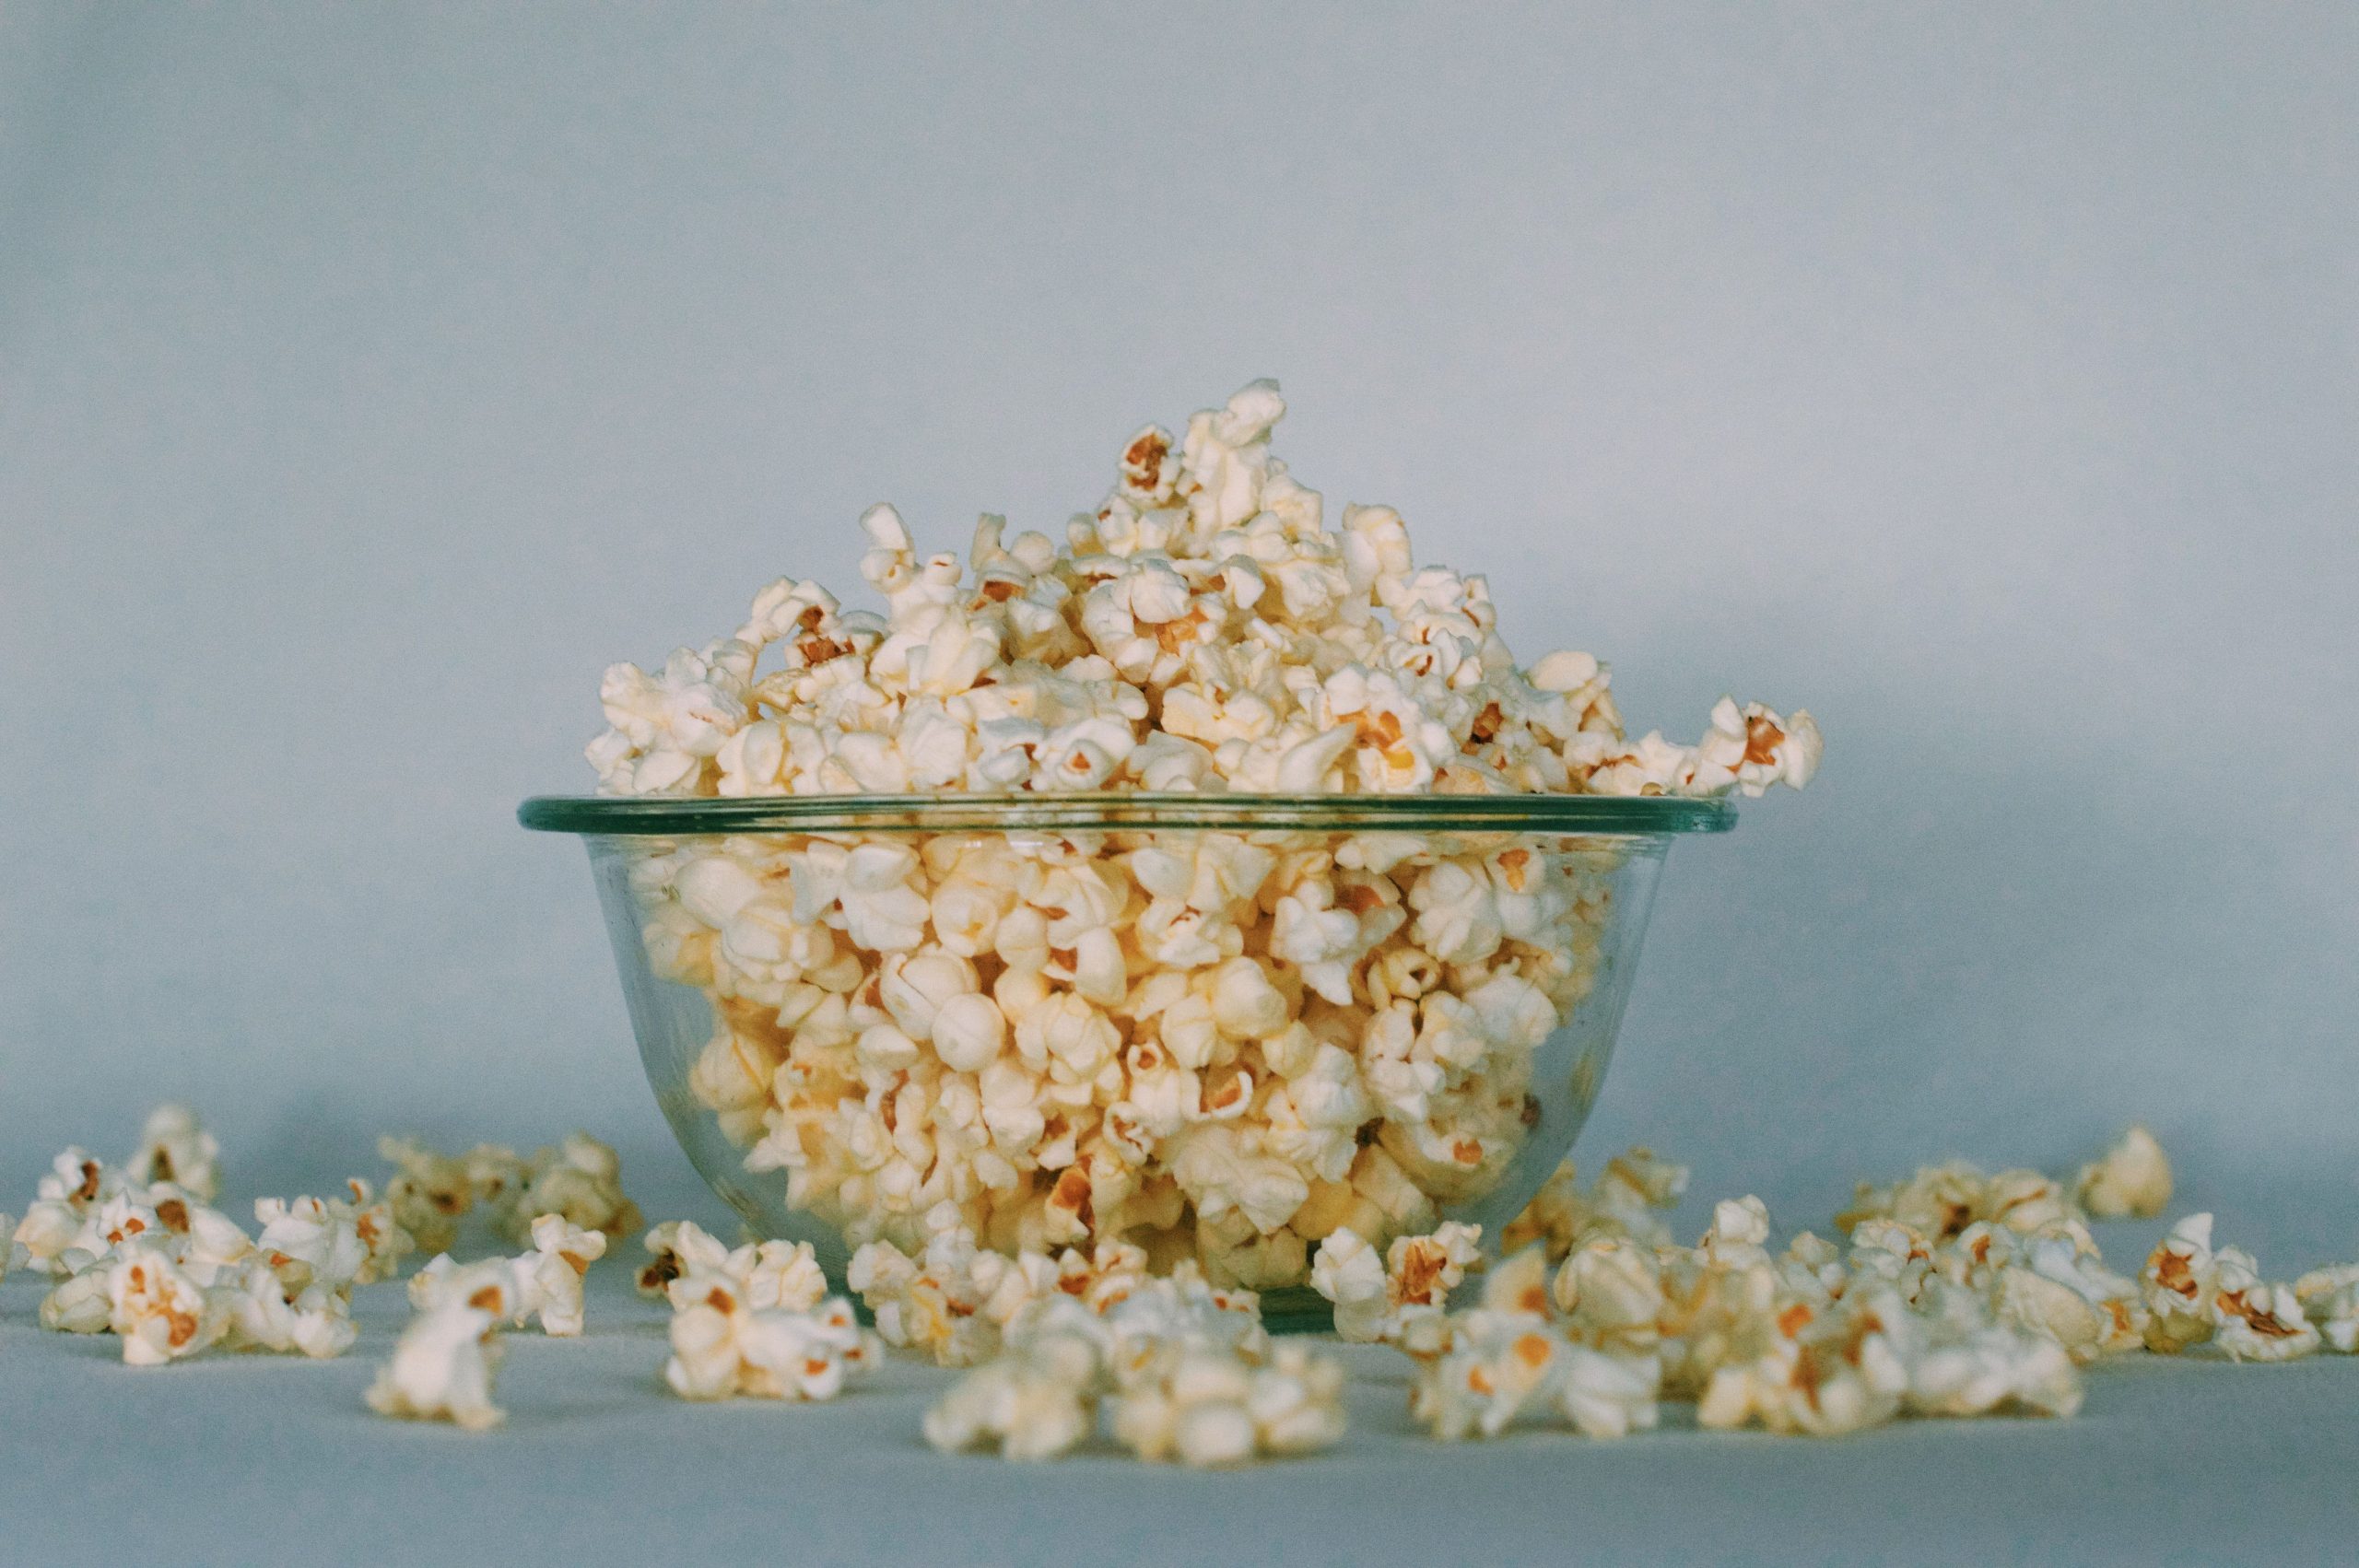 Popcorn or Salad? This viral recipe has divided the internet